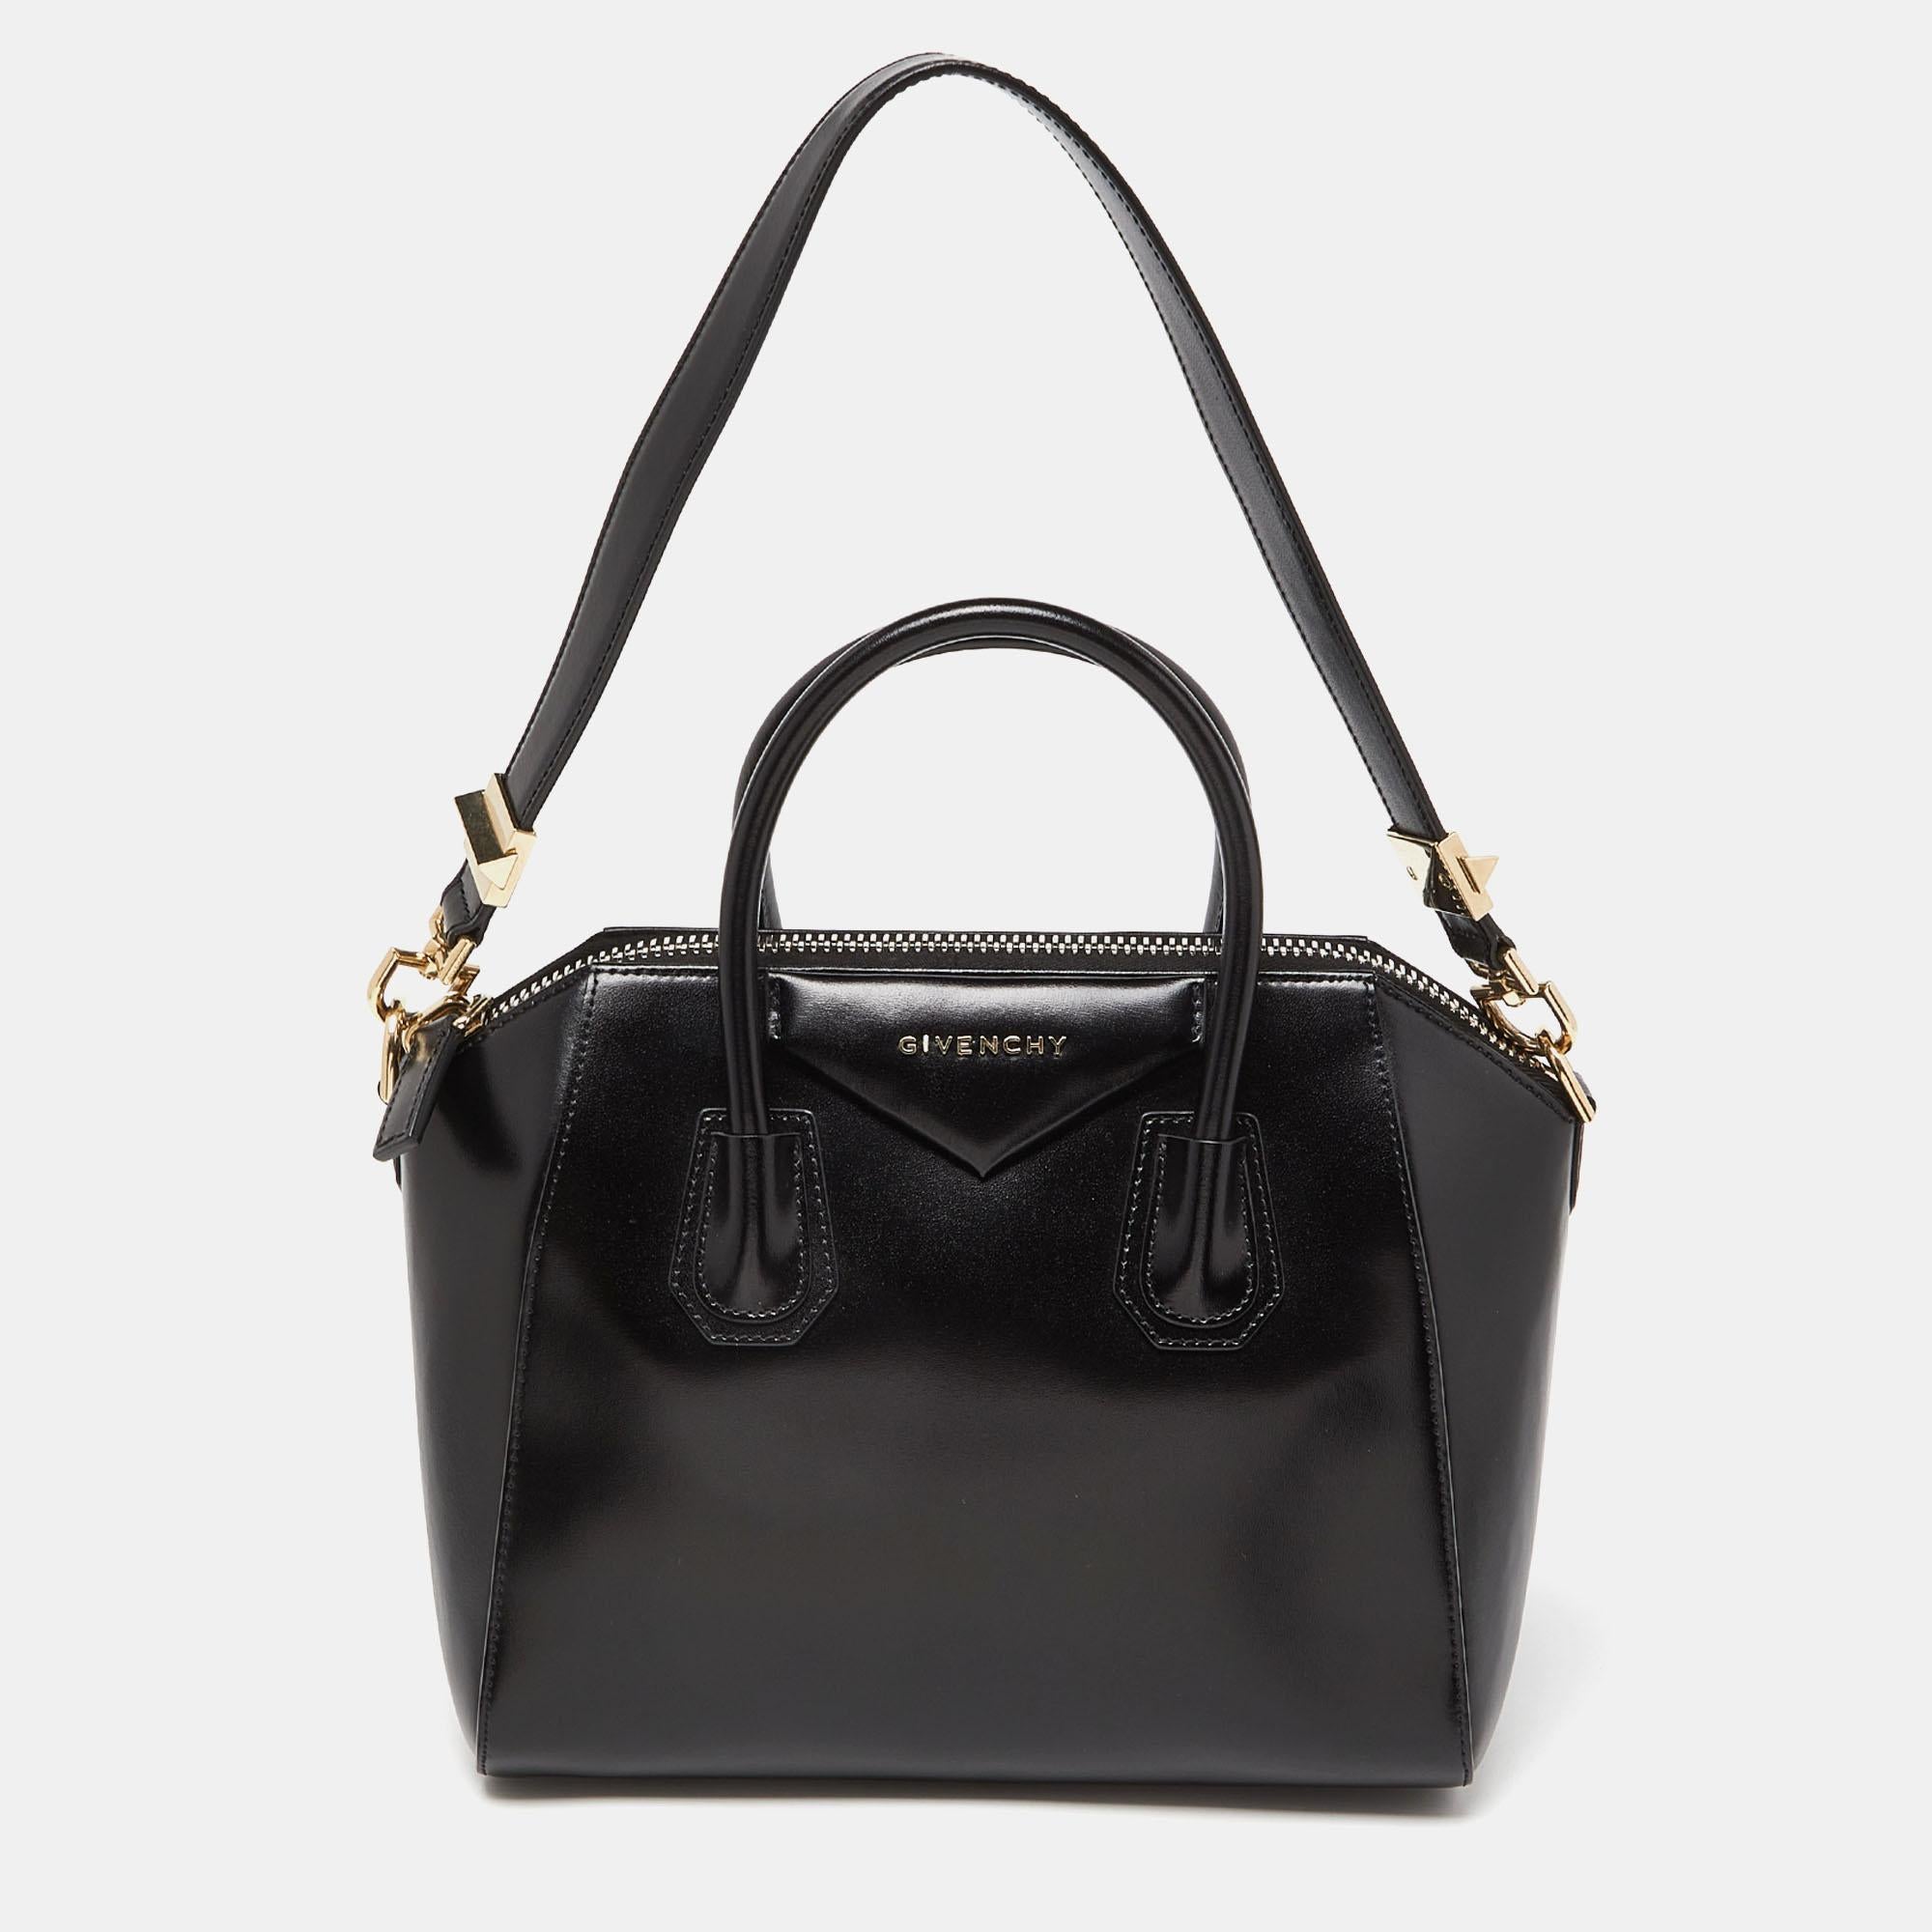 This Givenchy stylish satchel has been crafted from fine materials. It opens to a capacious interior that can easily hold your everyday essentials. Swing the Antigona with style!

Includes: Original Dustbag, Detachable Strap

